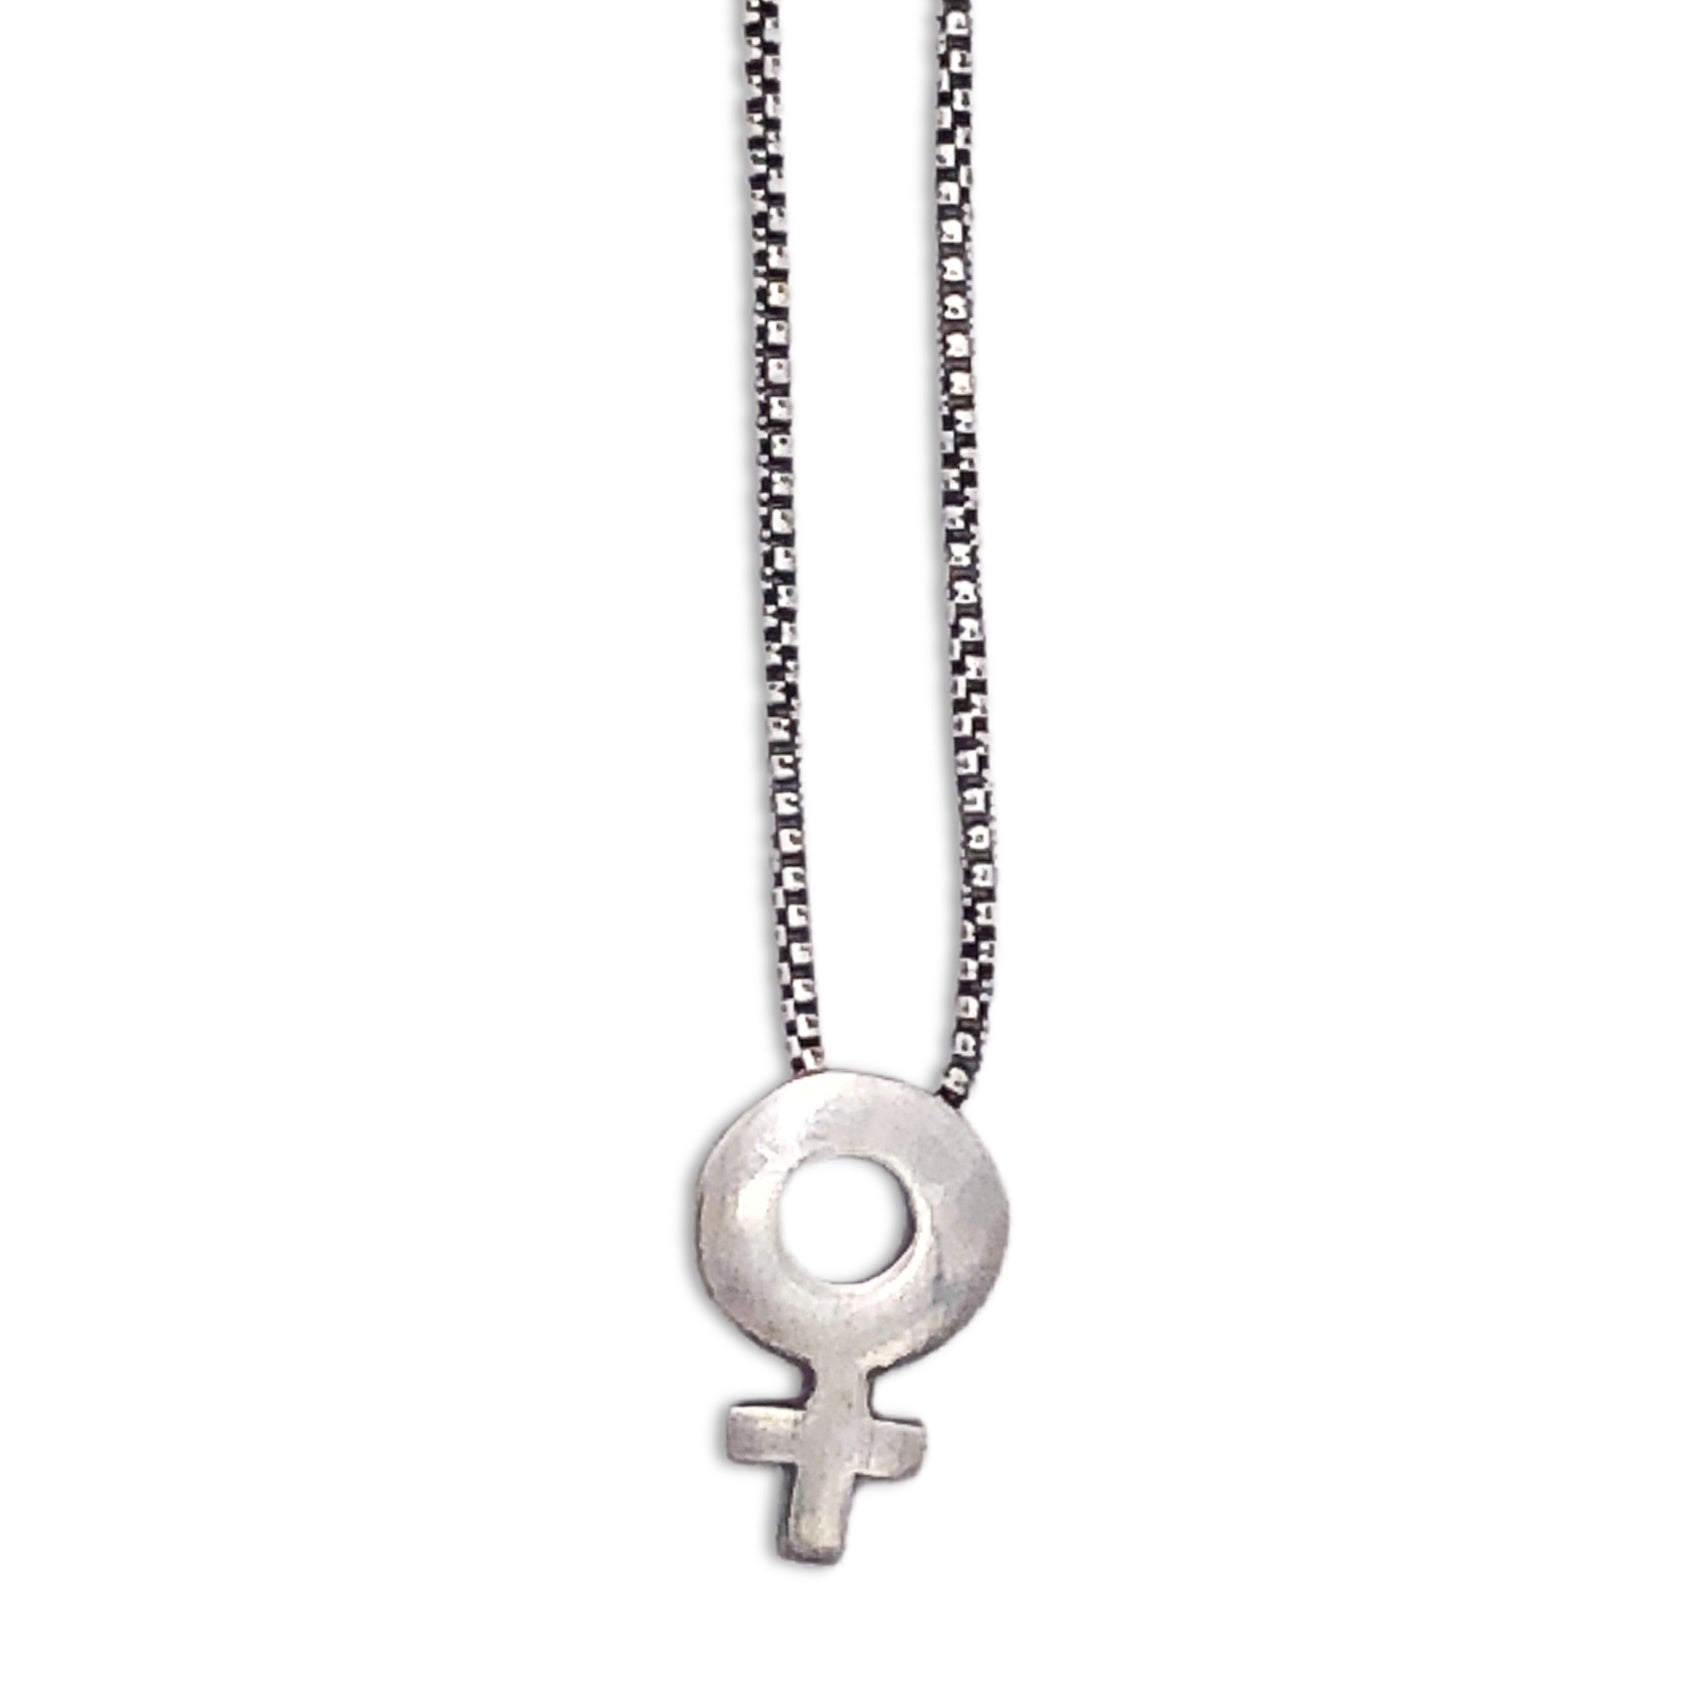 Female Charm Necklace